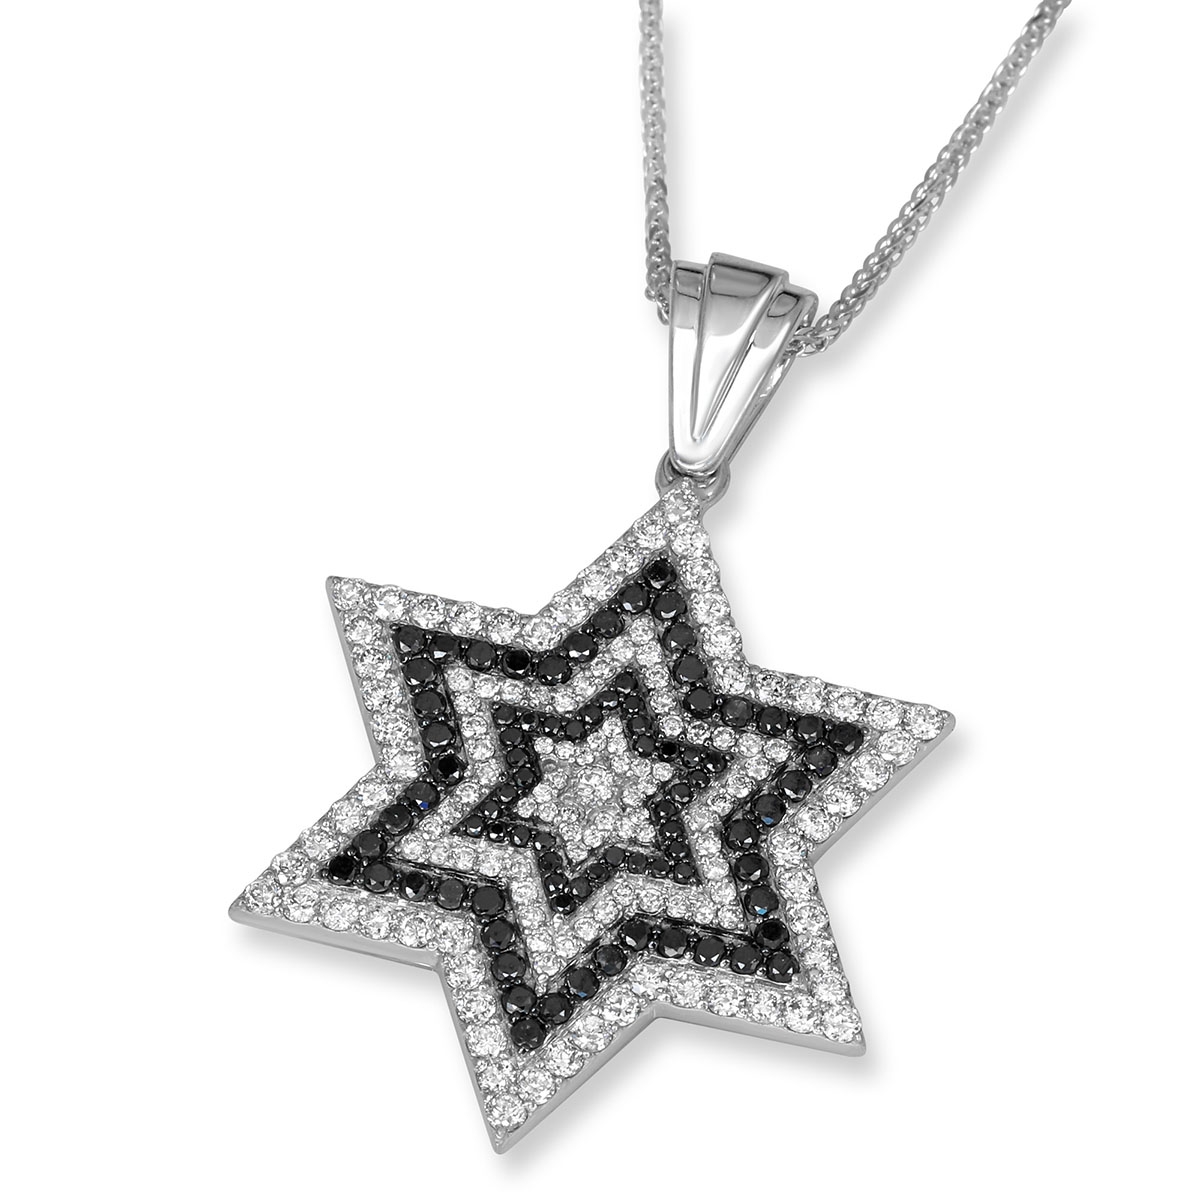 Anbinder Jewelry Deluxe 14K White Gold Star of David Pendant With White and Black Diamonds - 1